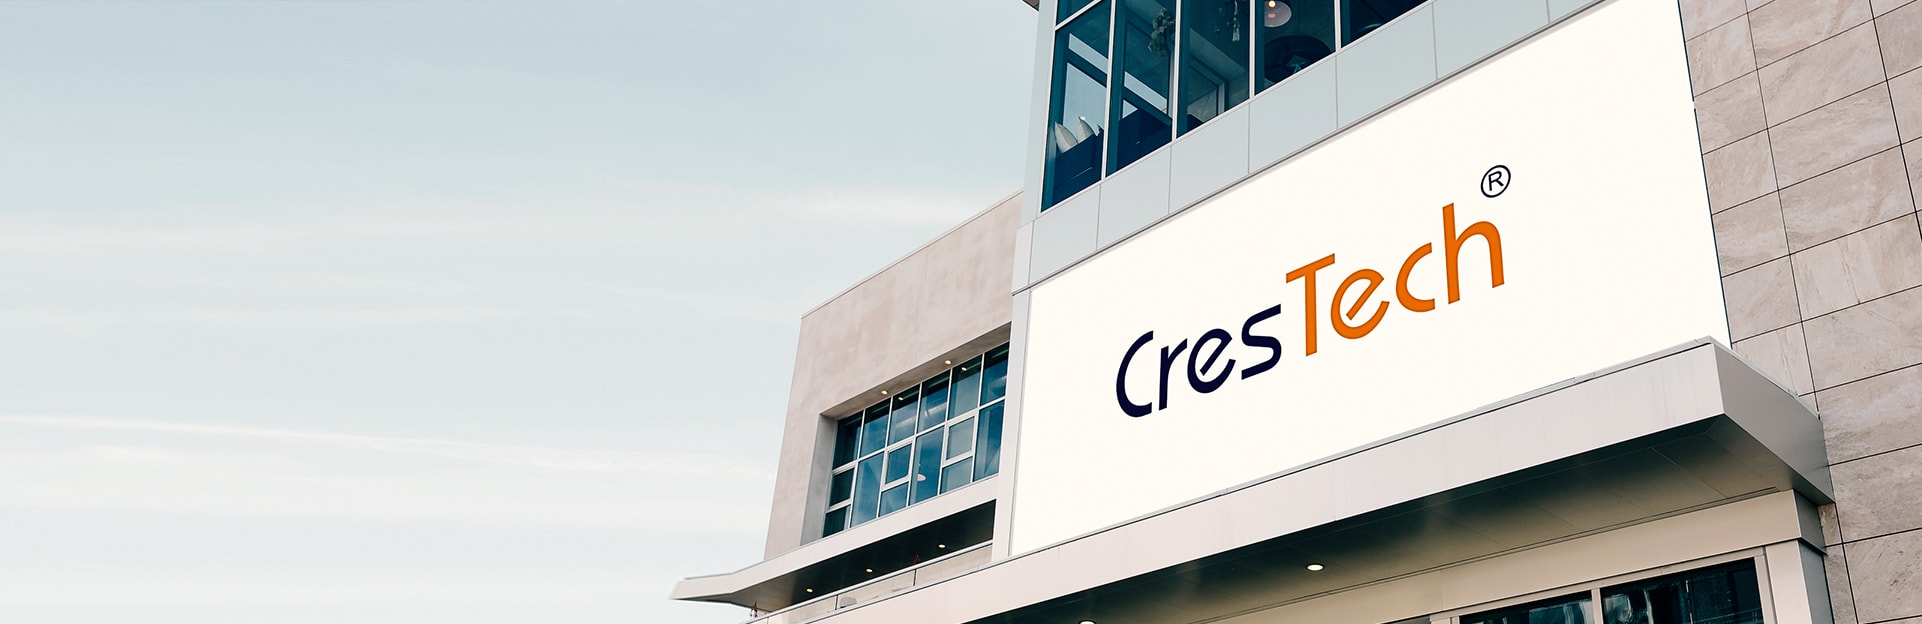 CresTech Software Systems Private Limited